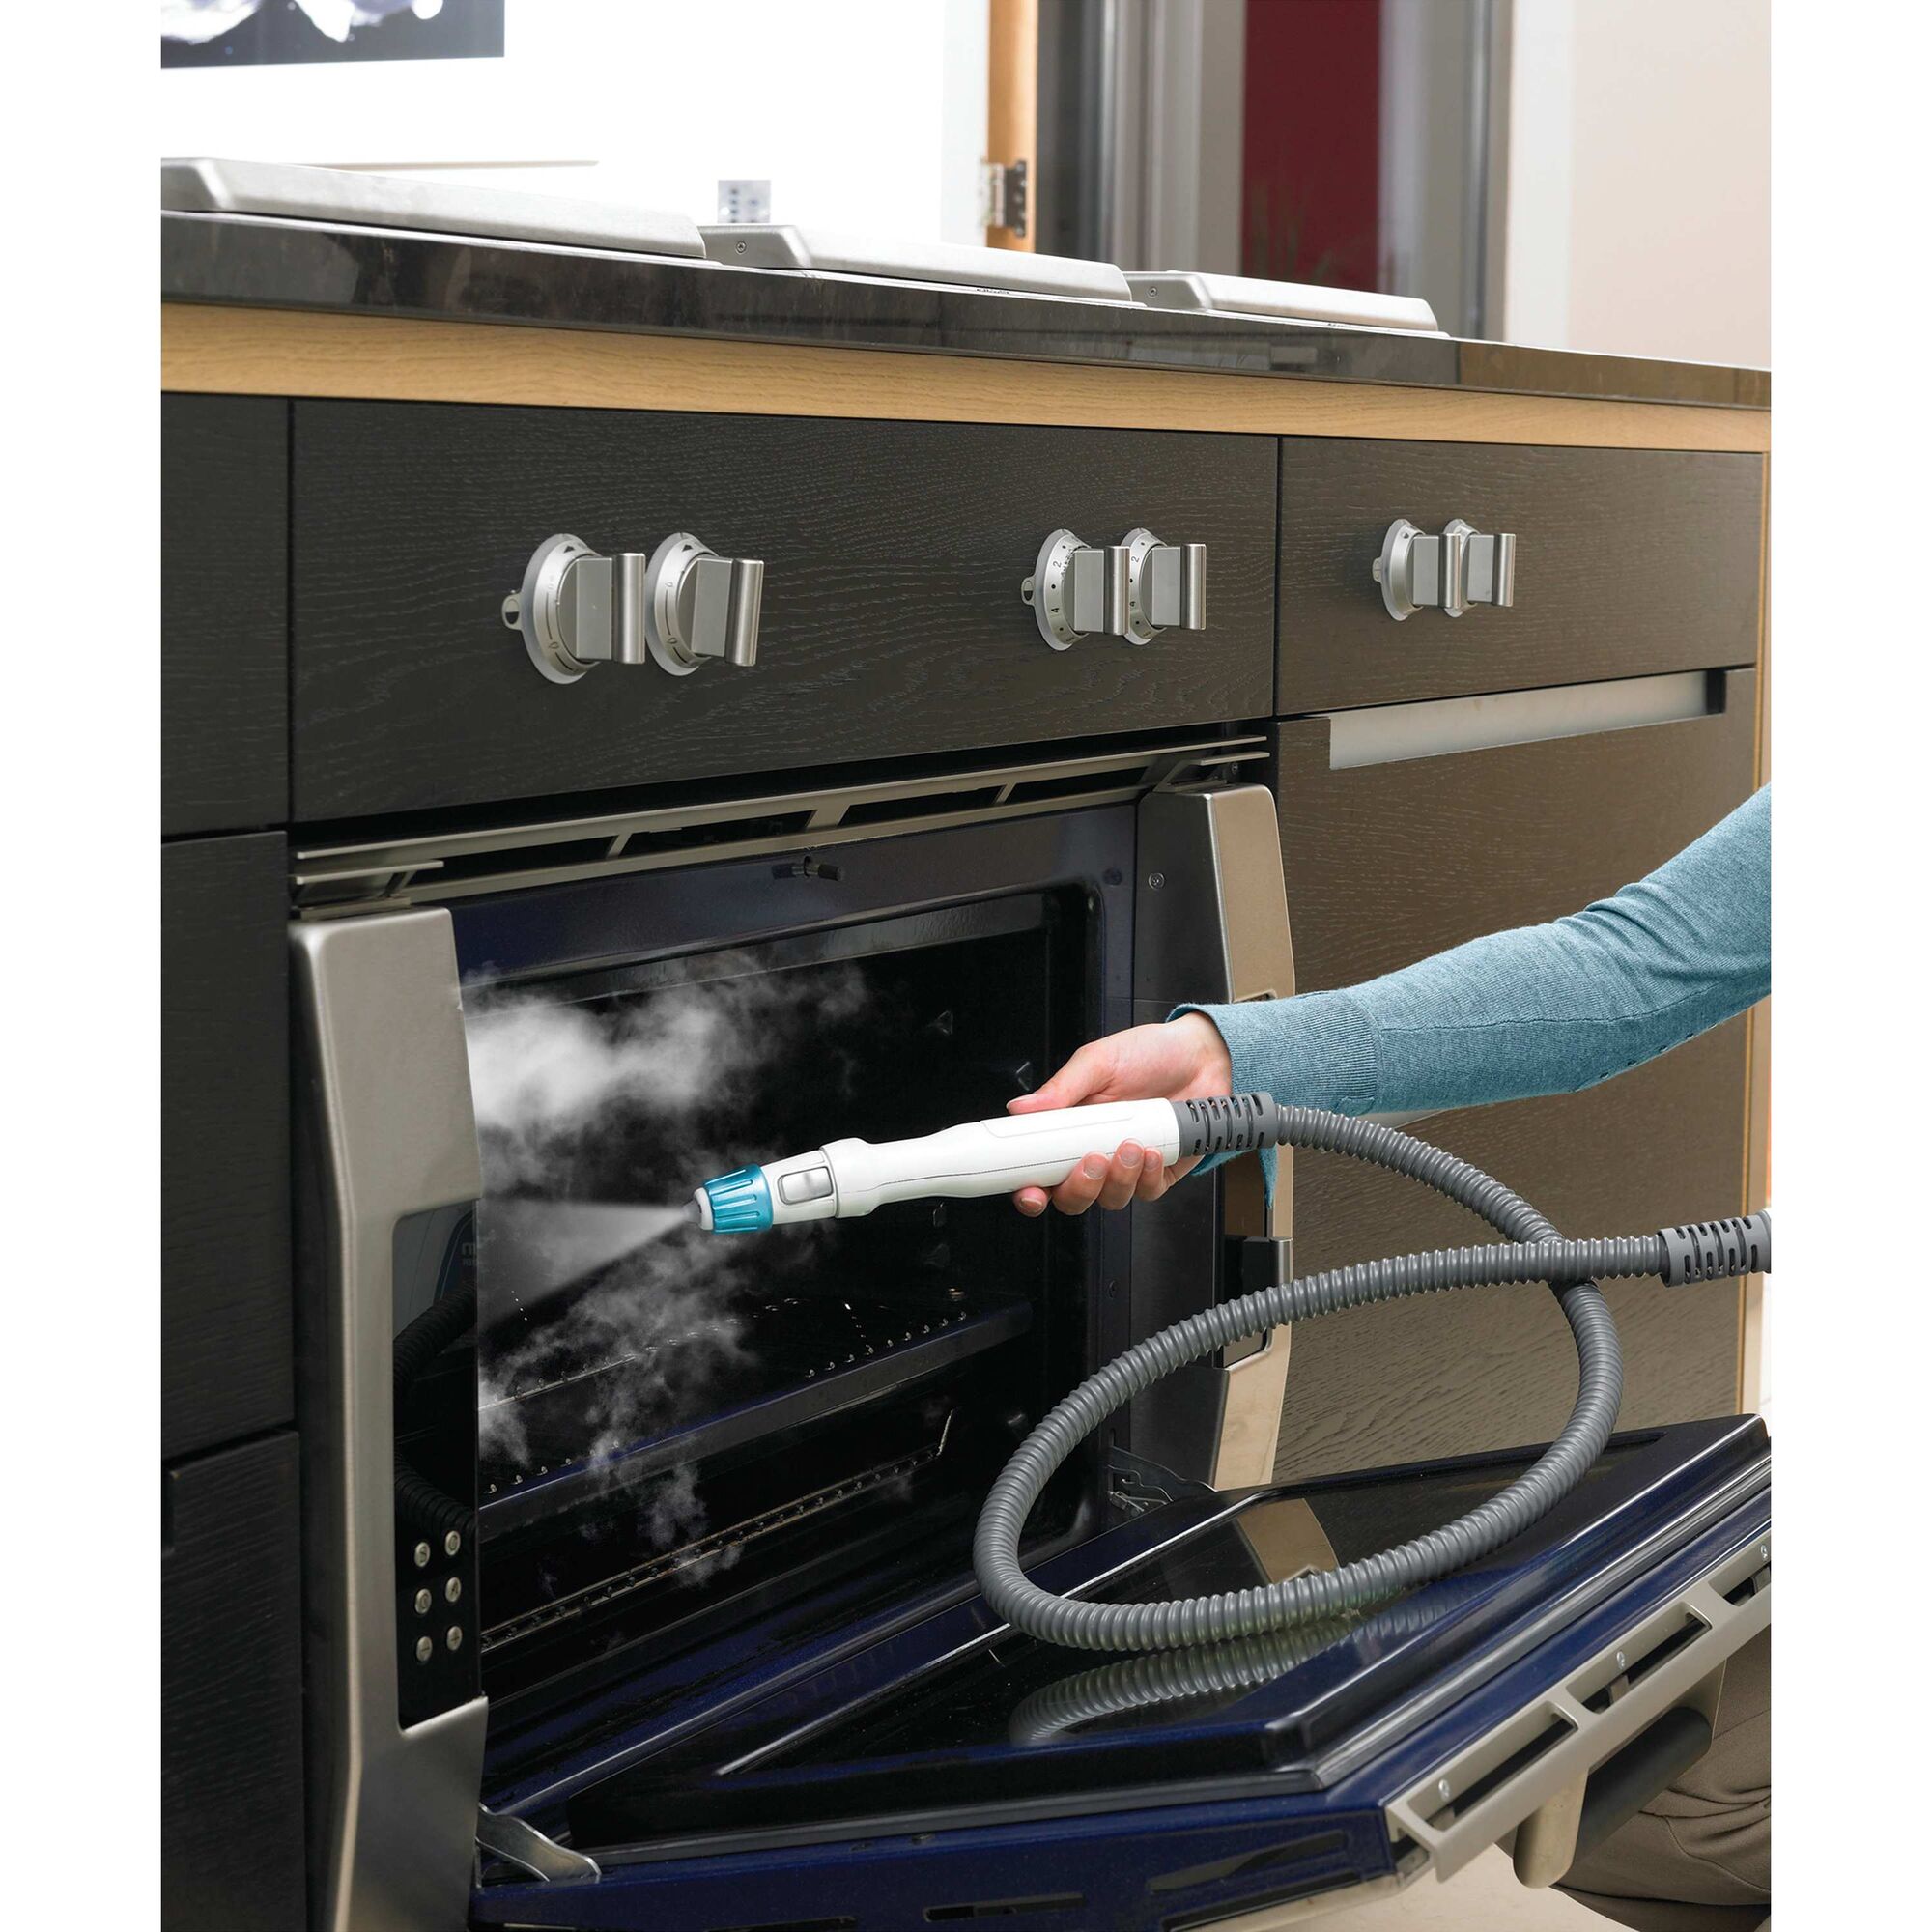 7 in 1 Steam Mop with Steam Glove Handheld Steamer being used to clean inside oven.